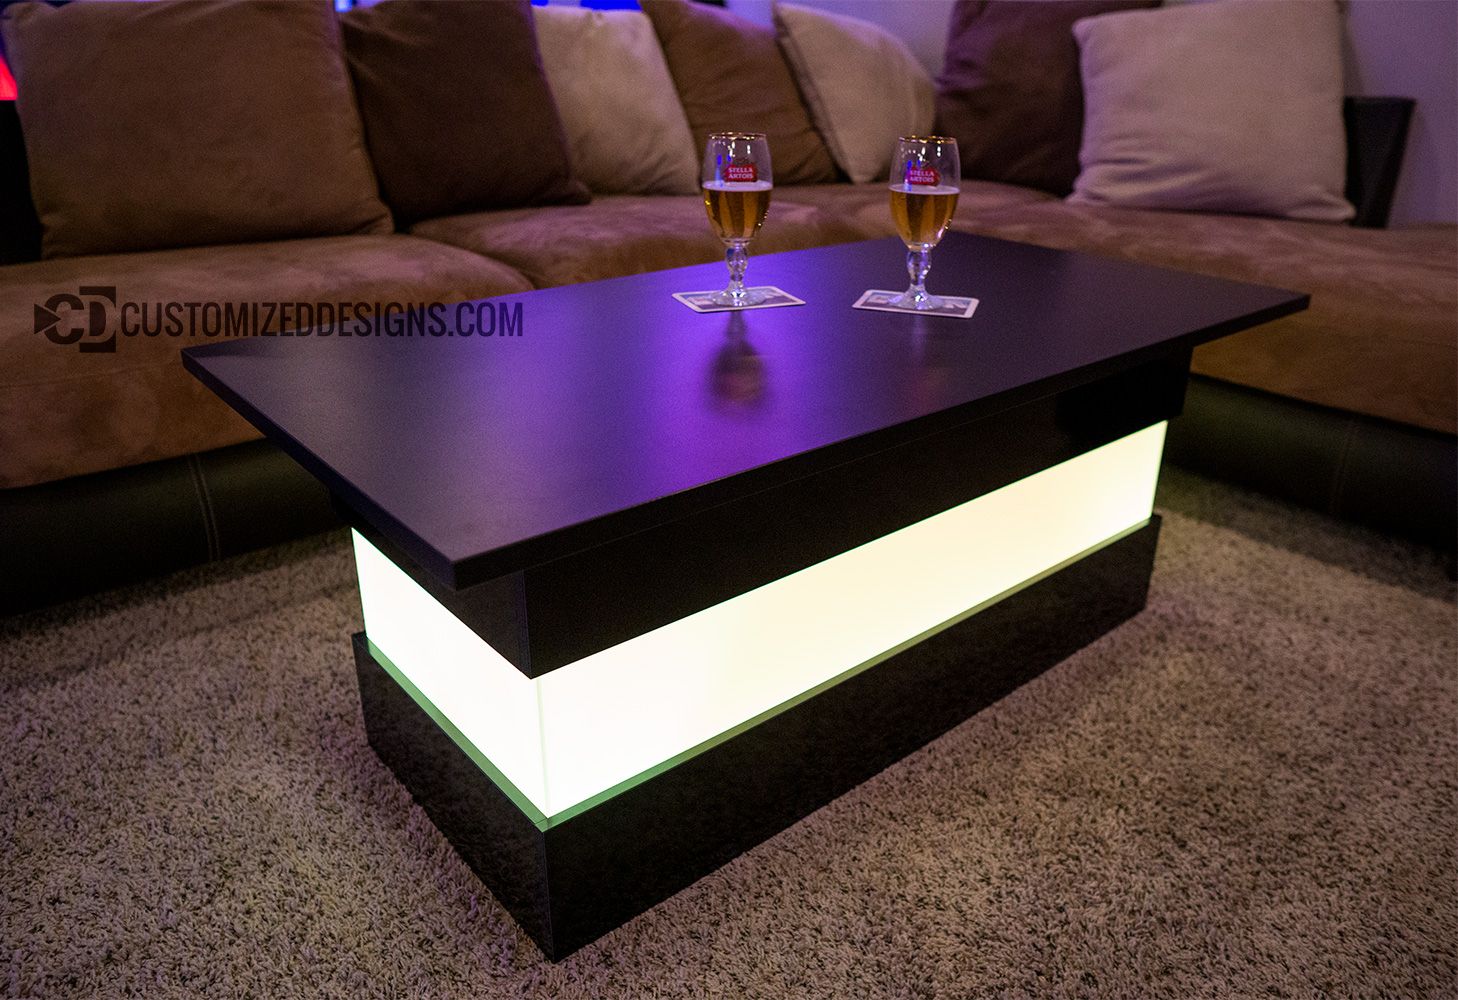 Mirage Led Lighted Coffee Table – Perfect For Lounges And Nightclubs! With Regard To Led Coffee Tables With 4 Drawers (View 18 of 20)